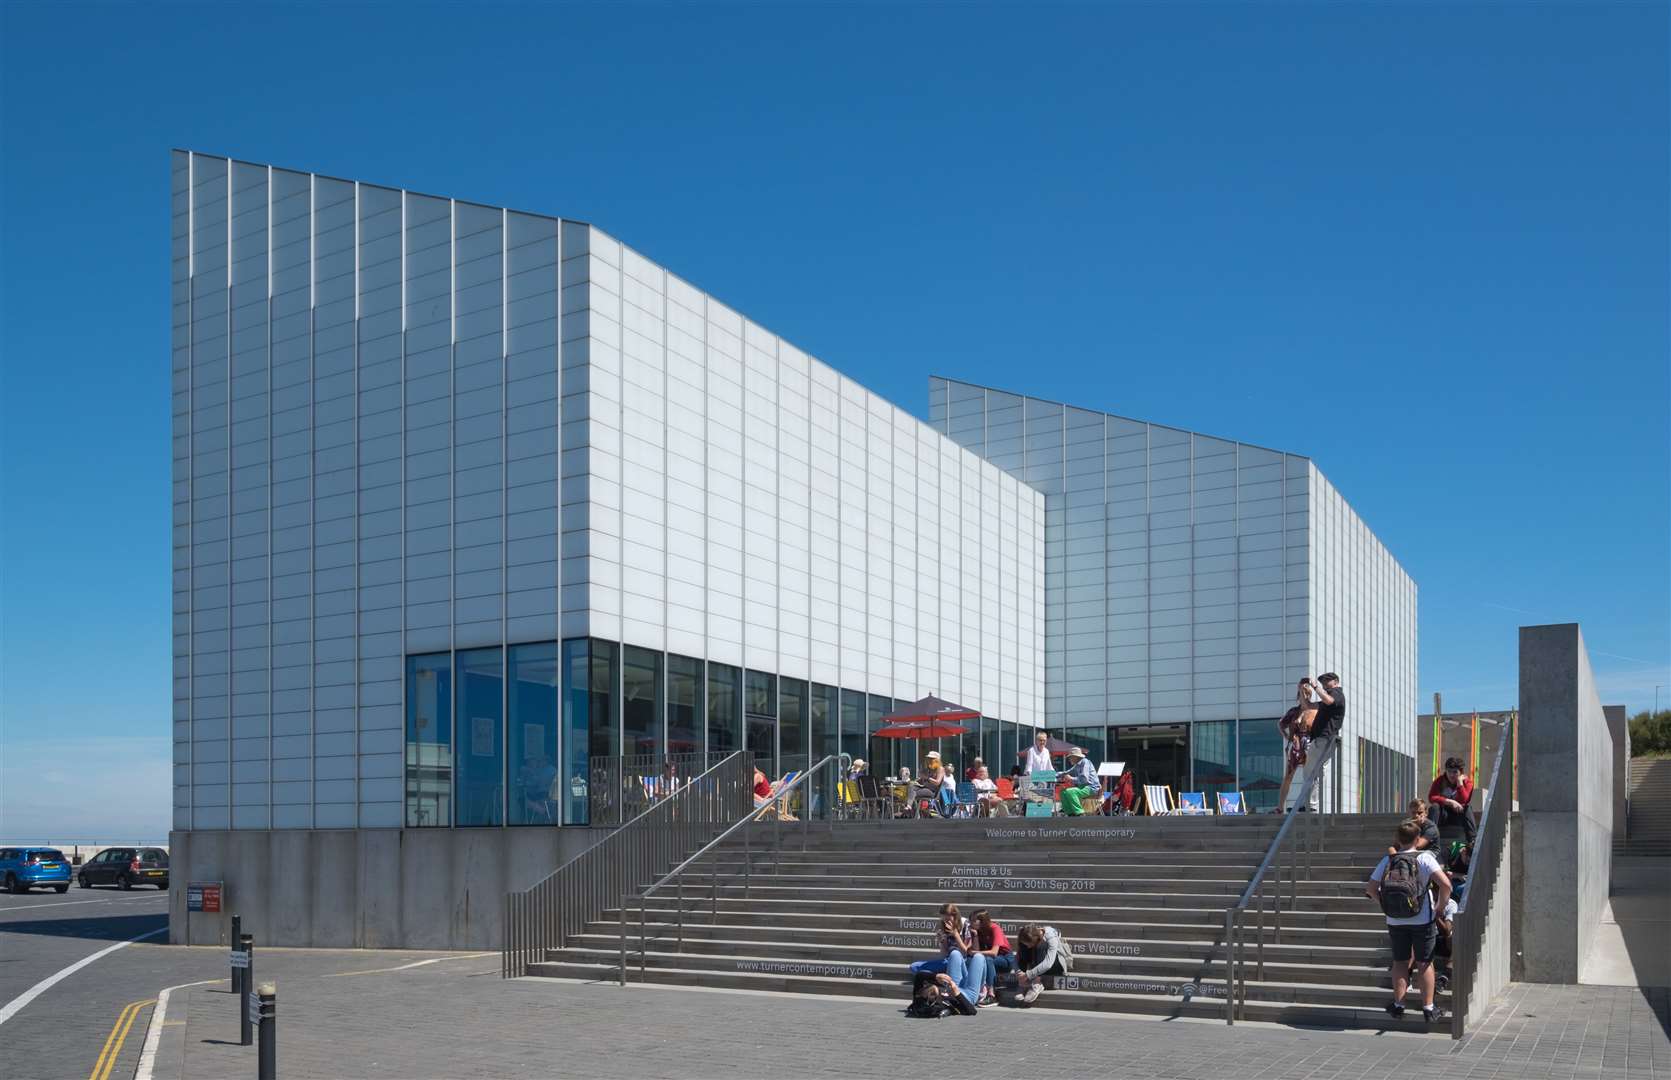 The Turner Contemporary will host the award presentation of Tuesday night